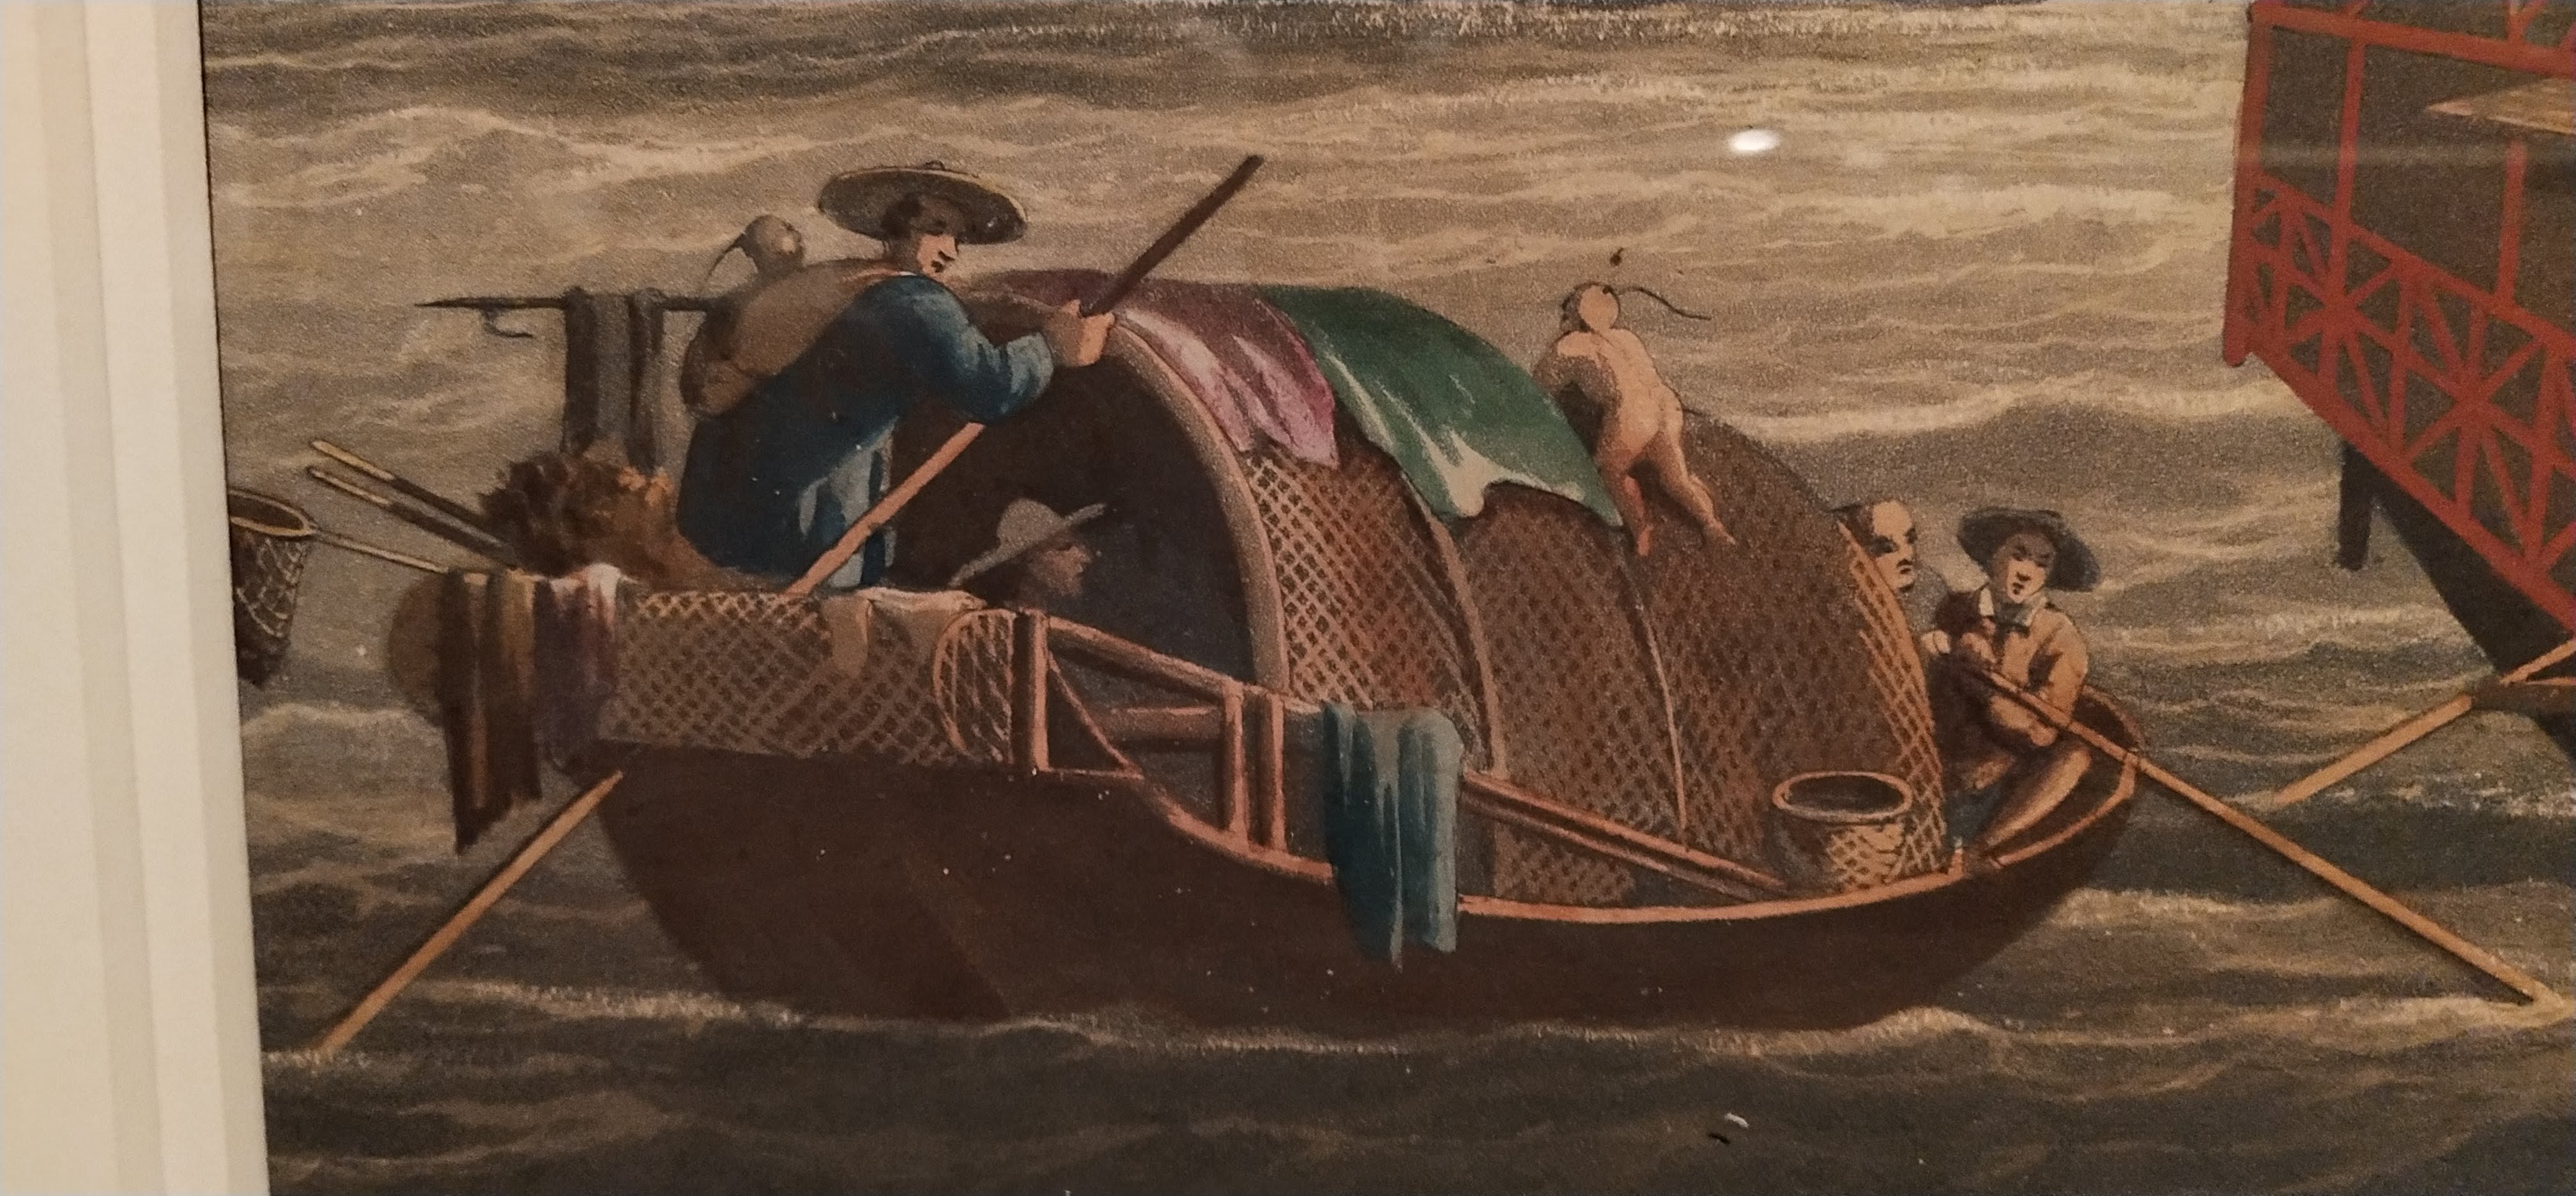 sampan boat, woman with baby on back controlling the boat, toddler falling to the sea